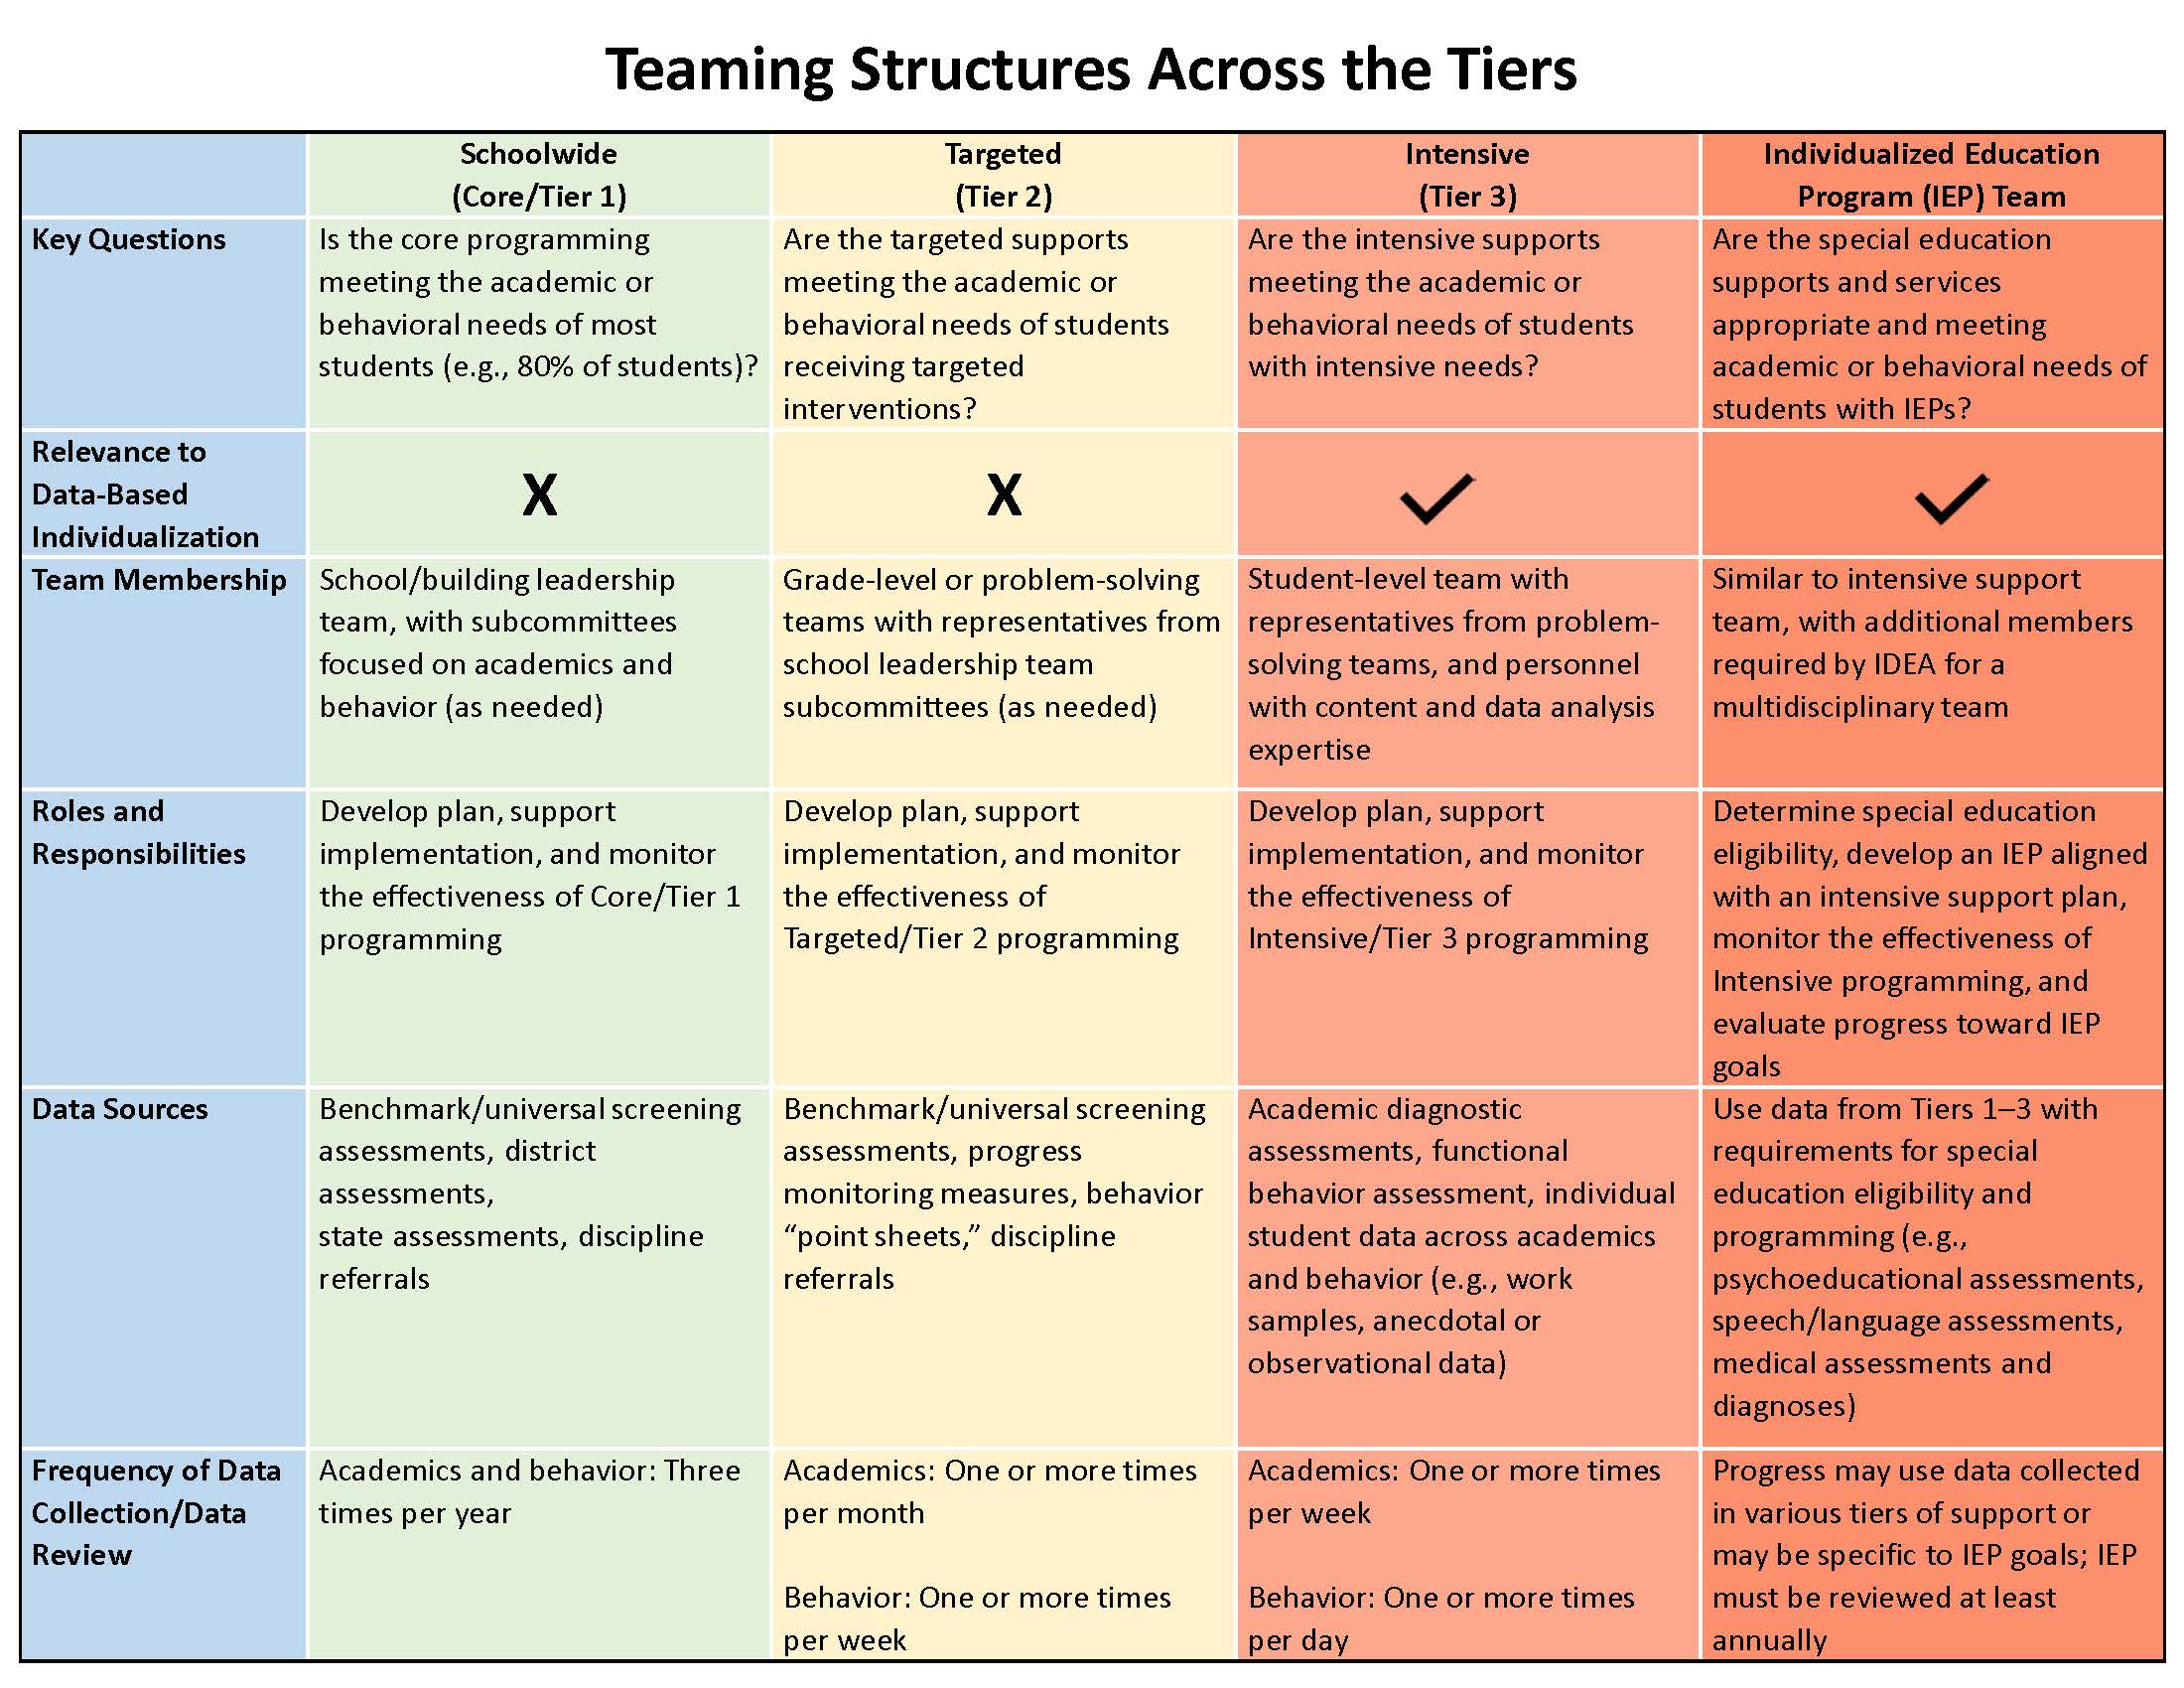 table of teaming considerations across the tiers